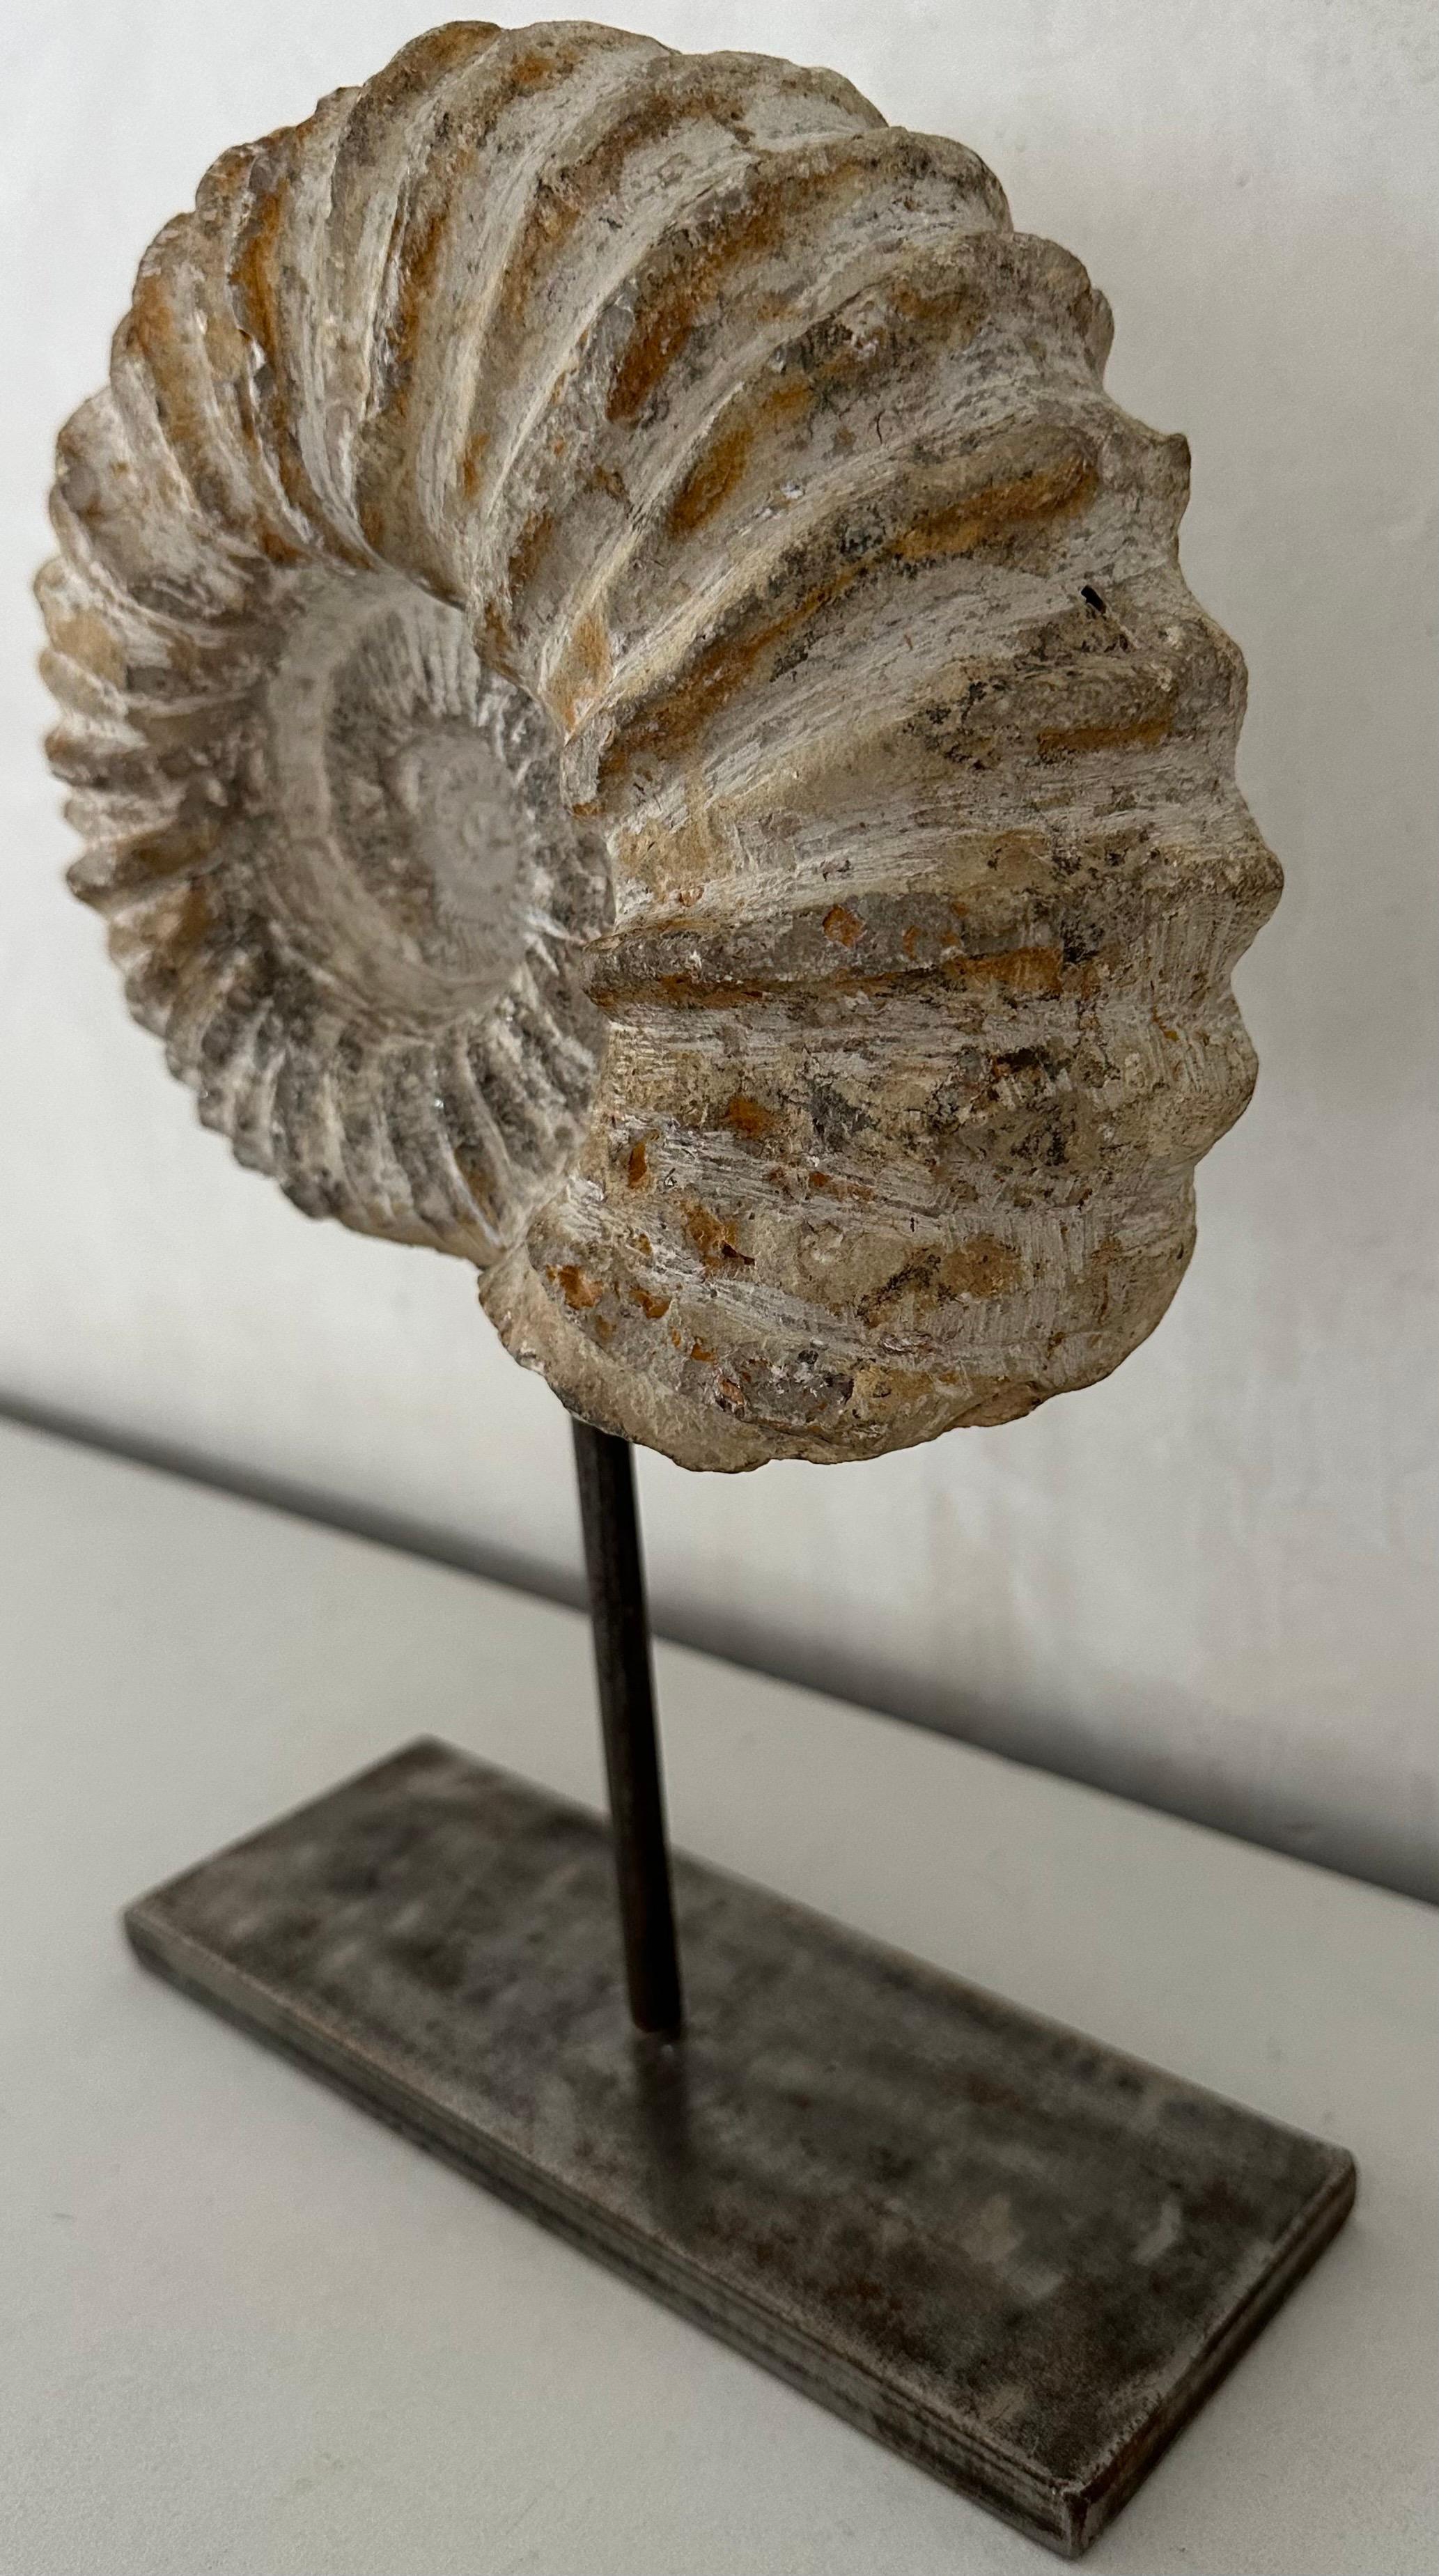 A lovely specimen of Albian type Ammonite mineral fossilized nautilus from Morocco in the Cretaceeous Era. The fossil has been mounted on an iron rod and a flat base making it a lovely art form sculpture piece.
The nautilus itself measures 7